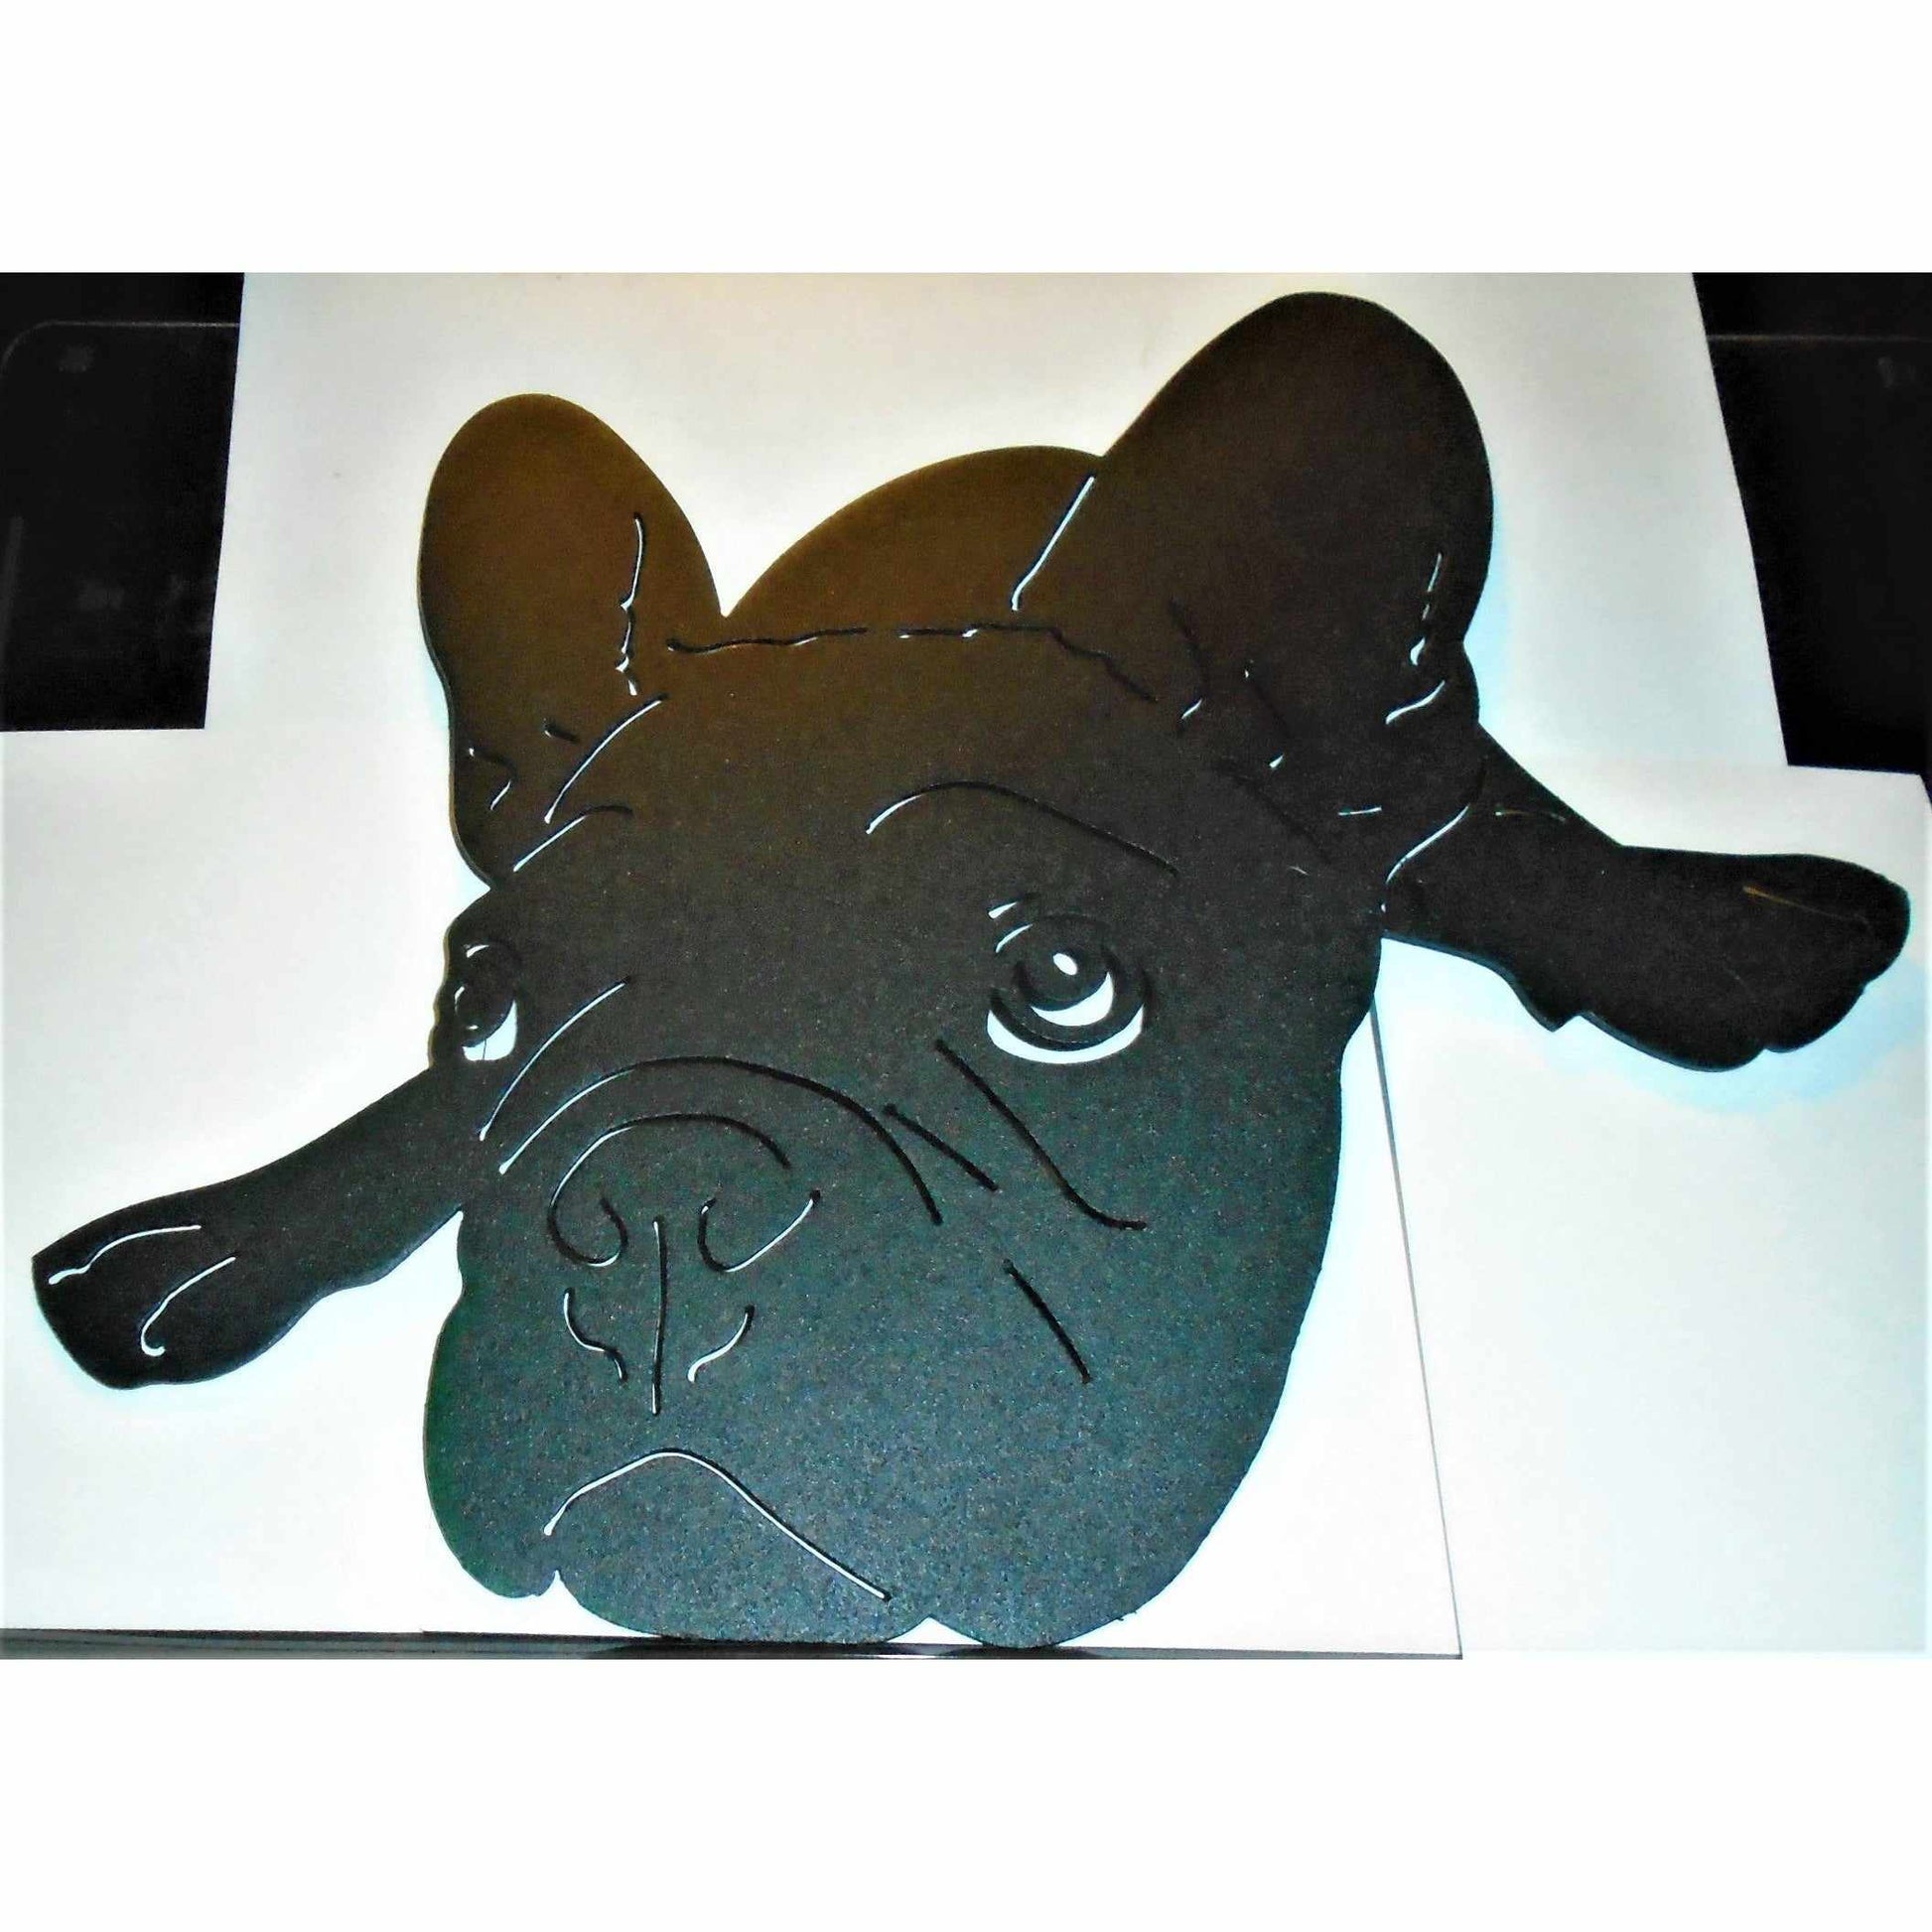 Dog Face Free-DXF files cut ready for CNC-DXFforCNC.com